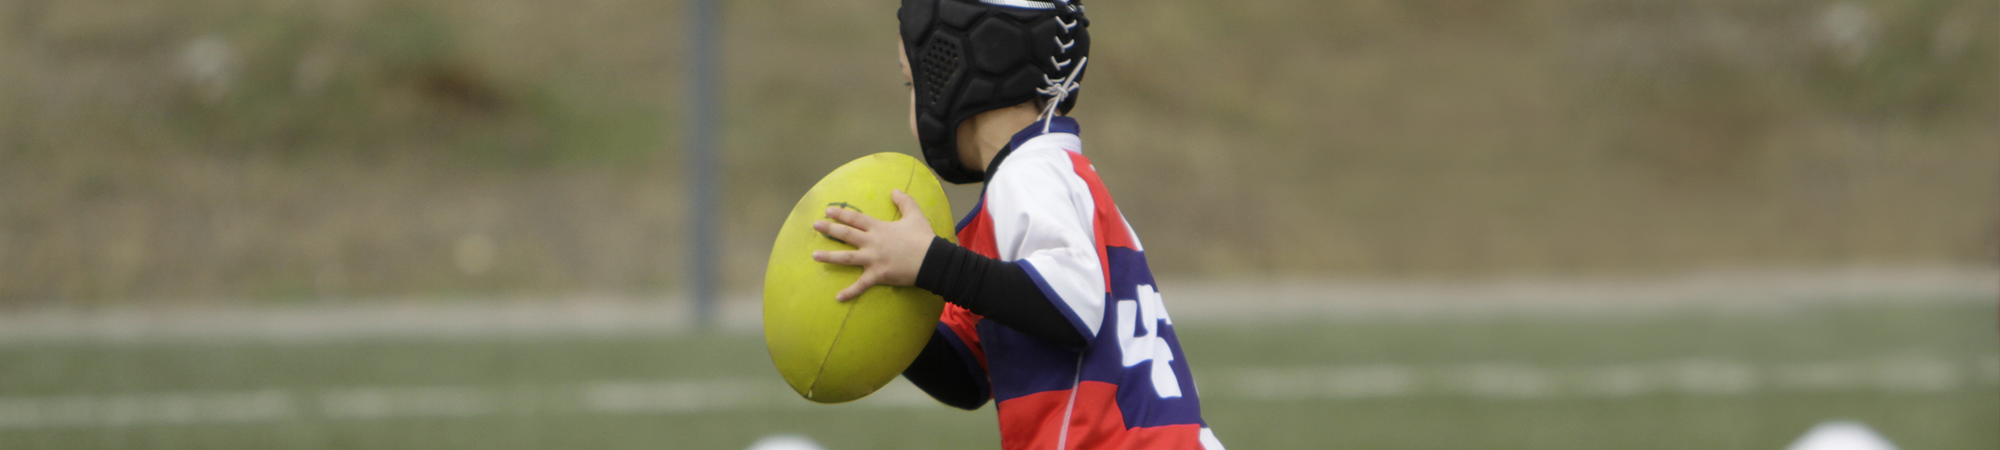 child playing rugby